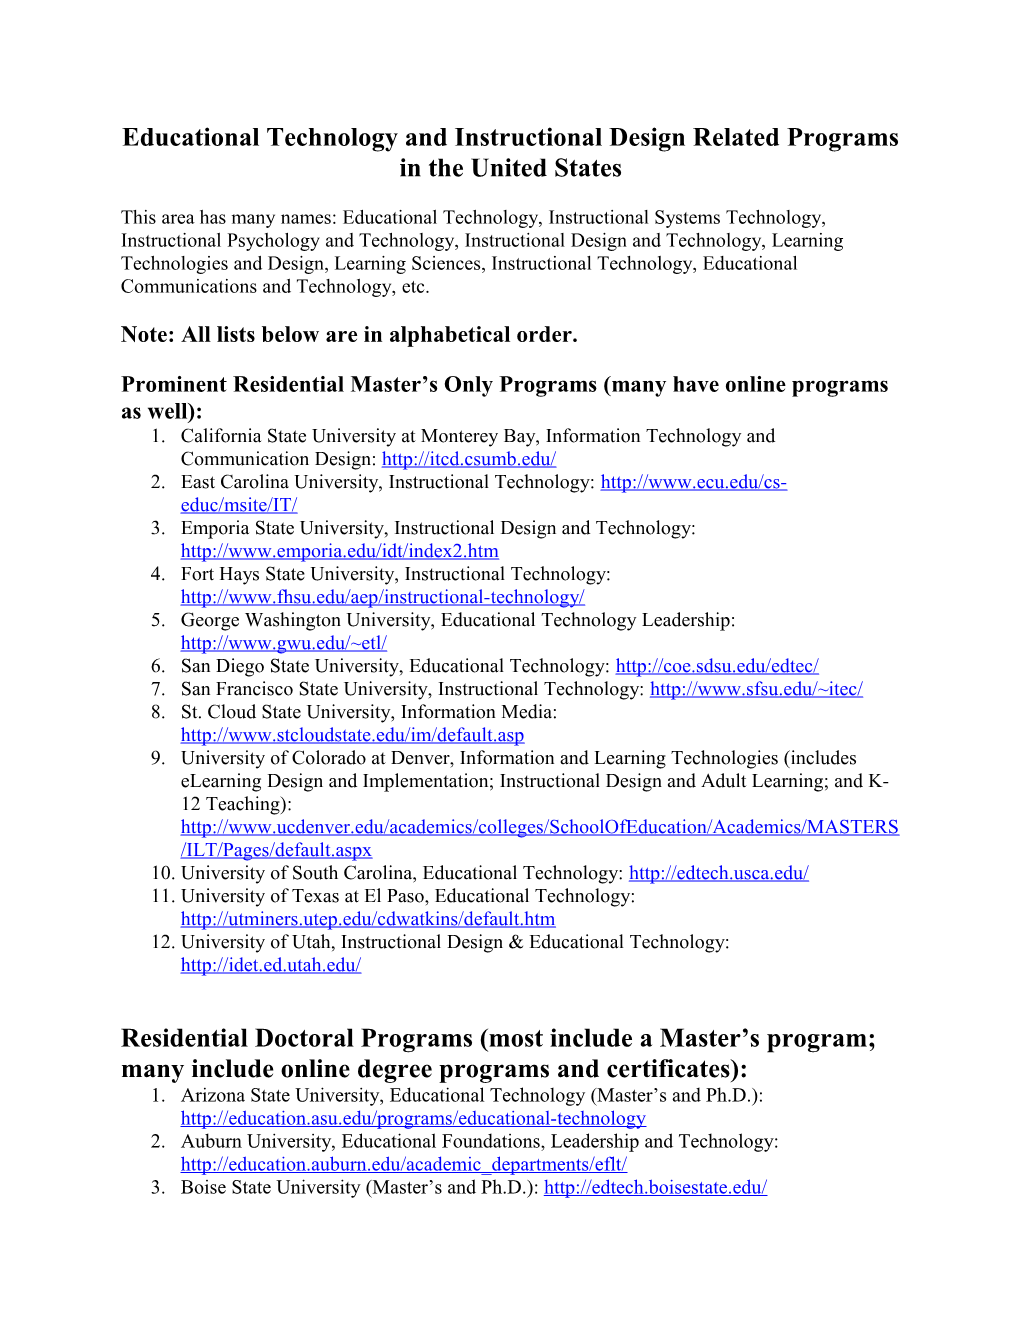 Educational Technology and Instructional Design Related Programs in the United States